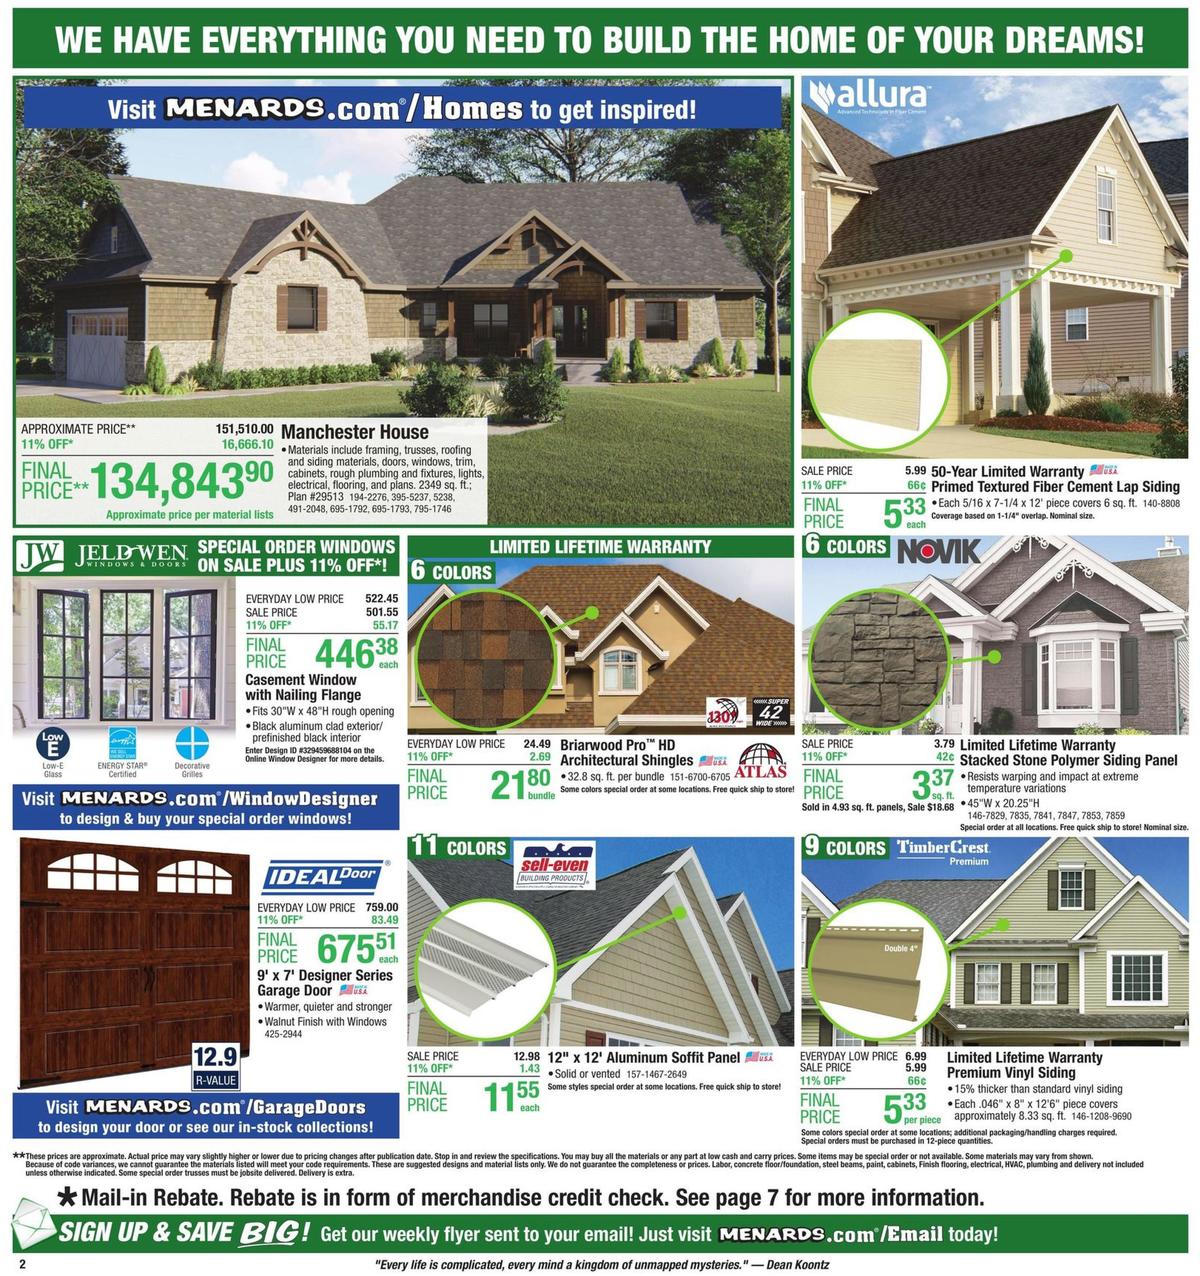 Menards Weekly Ad from September 22